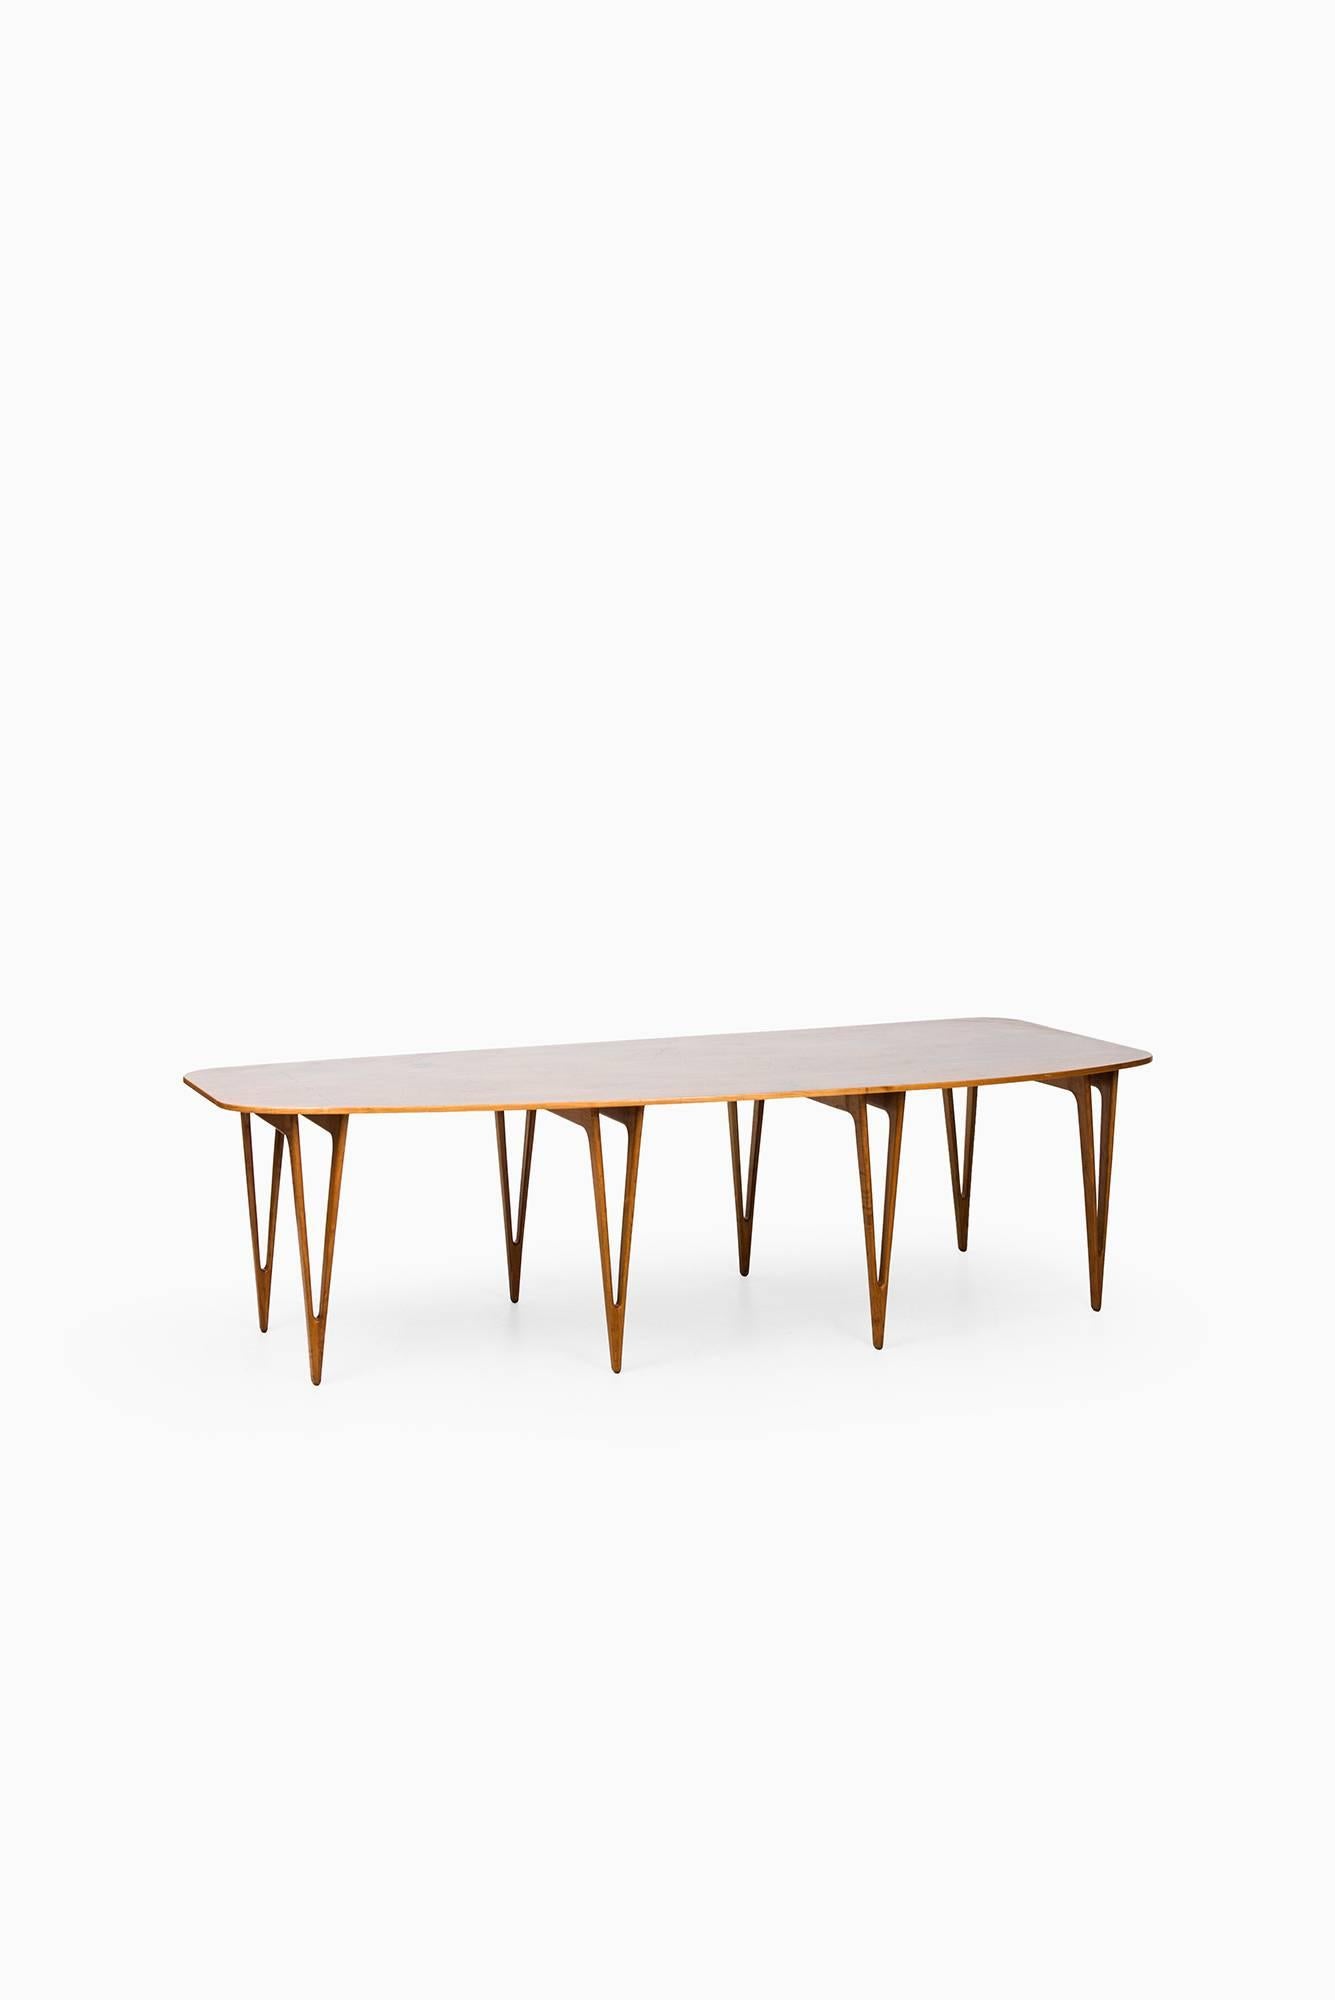 Mid-20th Century Børge Mogensen Console or Library Table by Erhard Rasmussen in Denmark